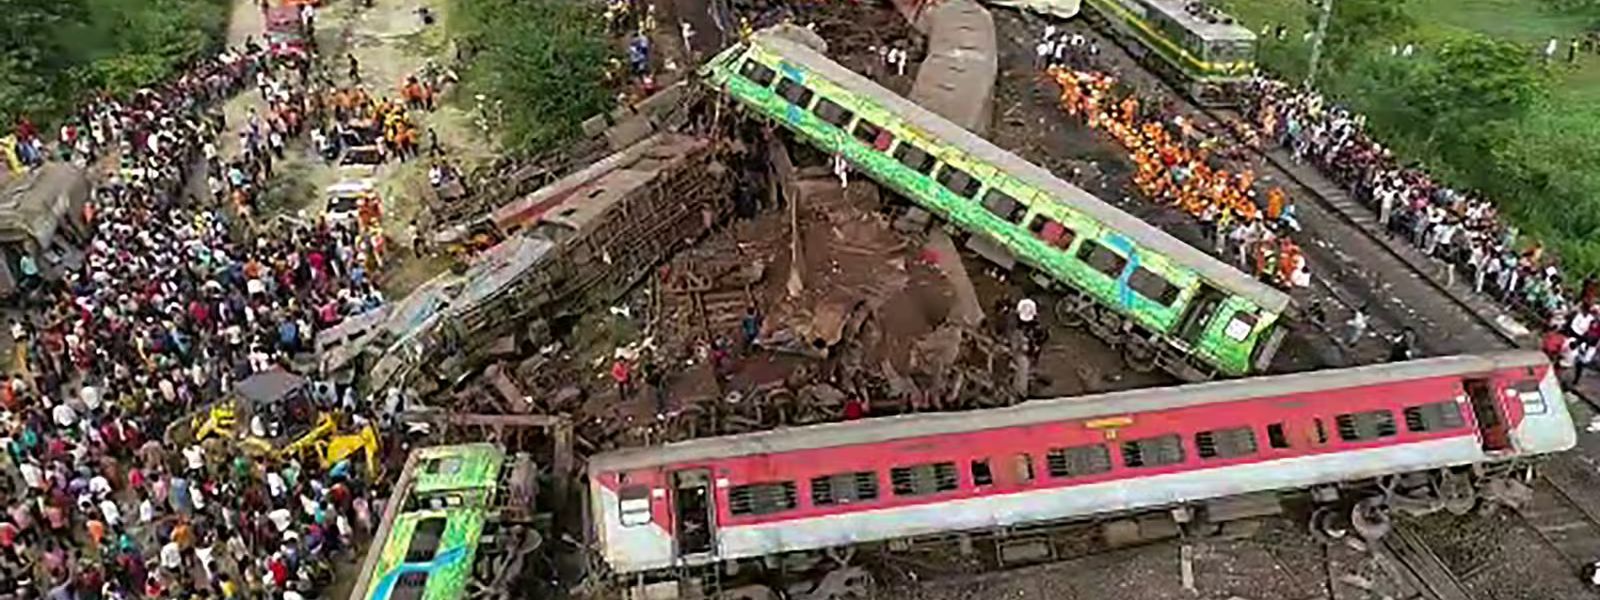 Odisha Triple Train Disaster: Error in electronic signals system appears to be the cause says Railway Minister